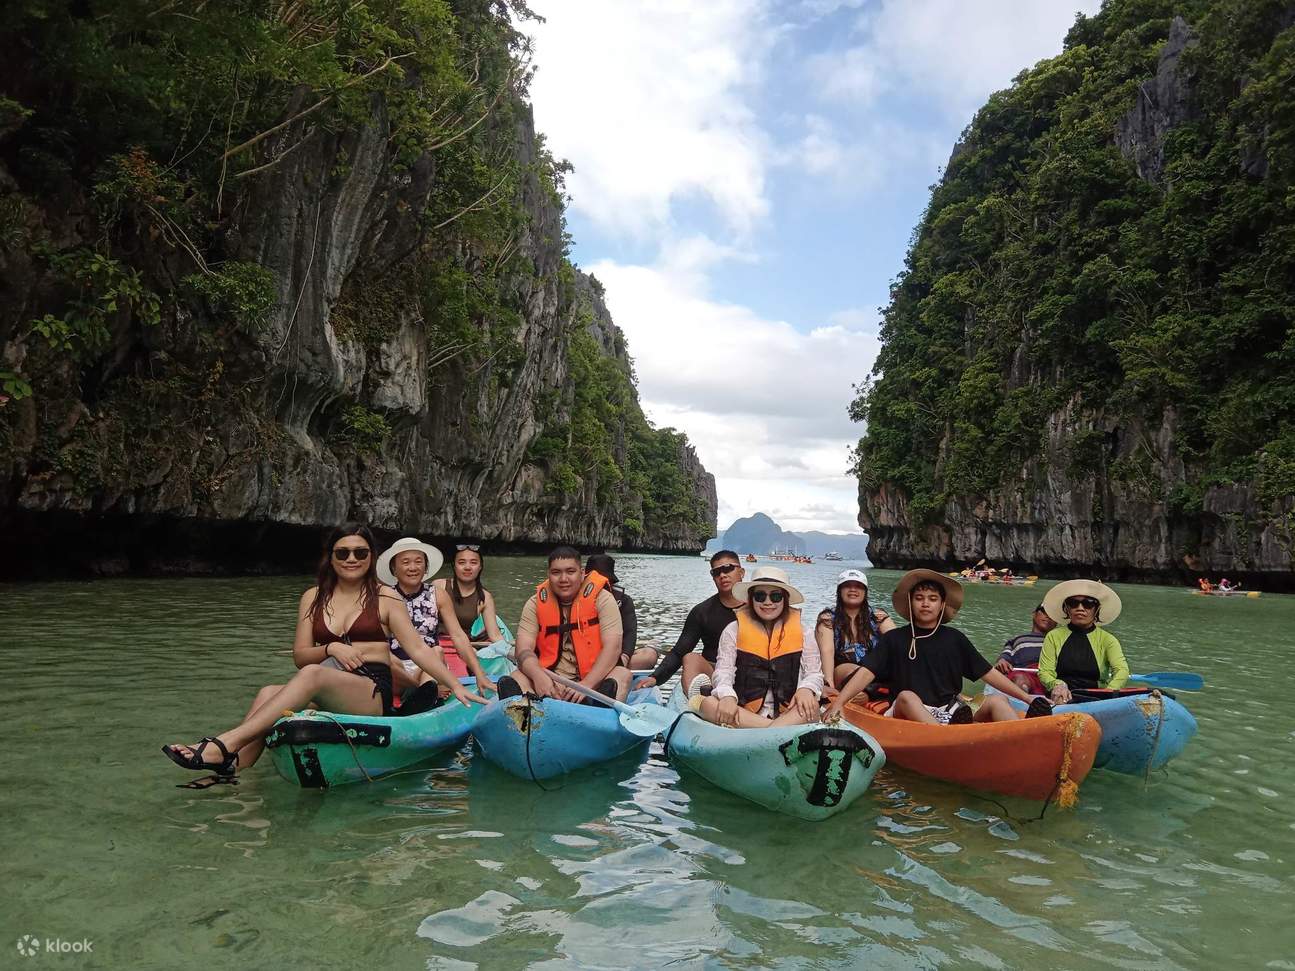 Explore El Nido, Palawan with an Unforgettable Tour - Klook Philippines